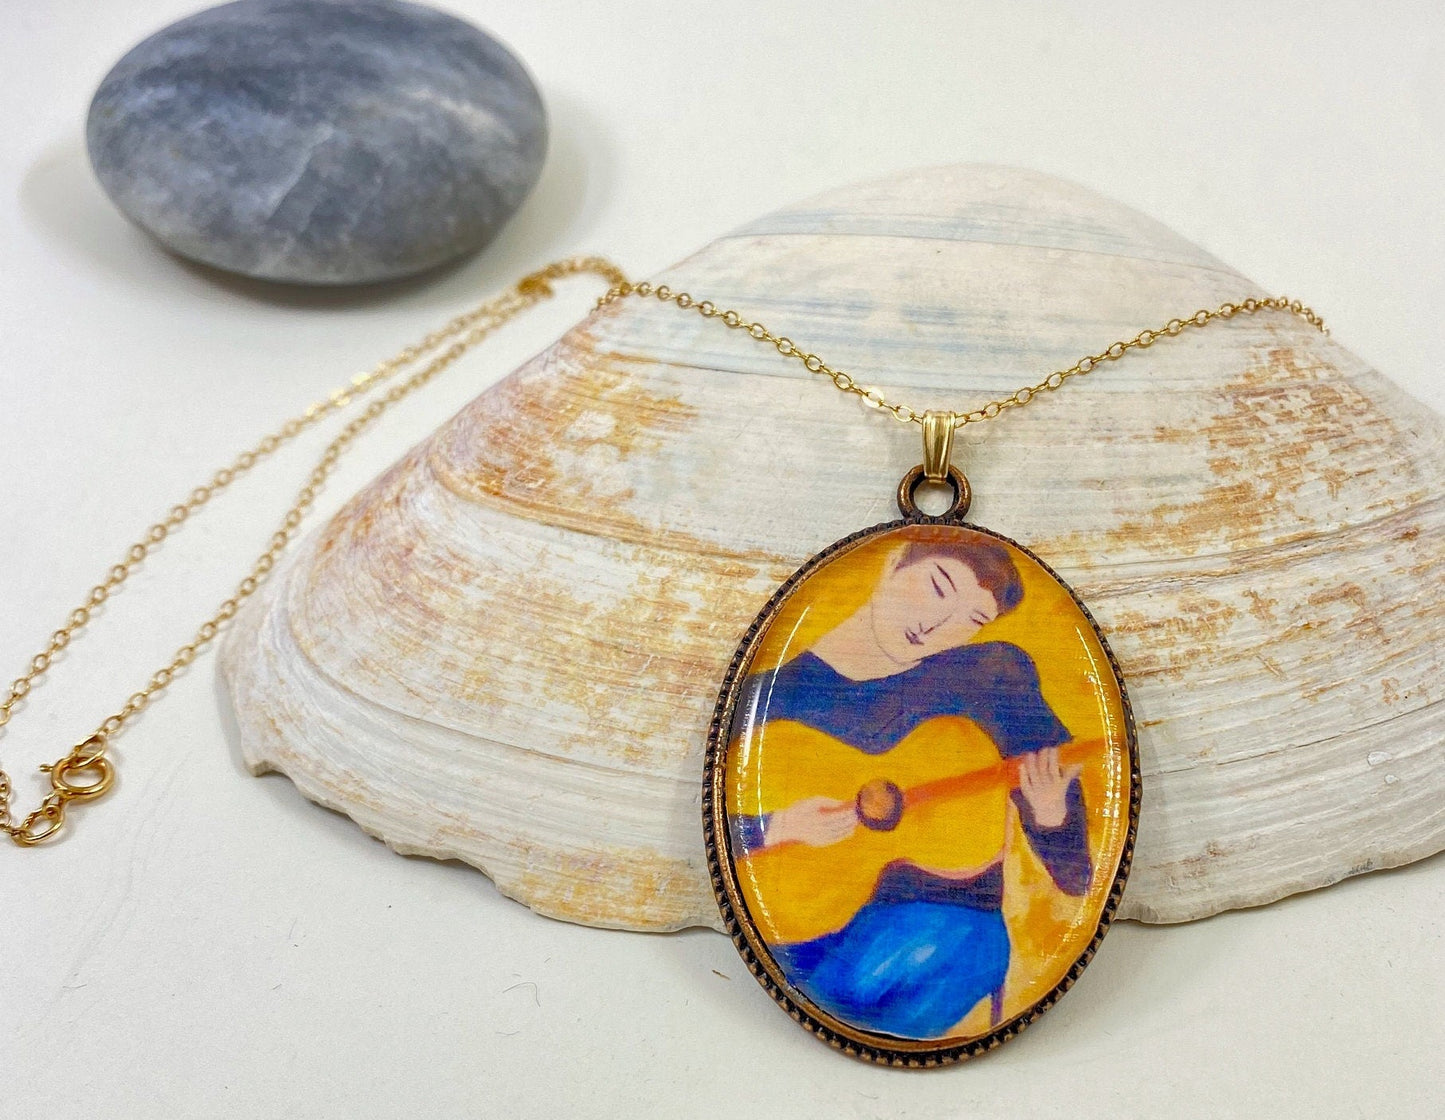 Original and beautiful hand painted guitar boy pendant. Set in a silver bezel on a sterling silver chain.